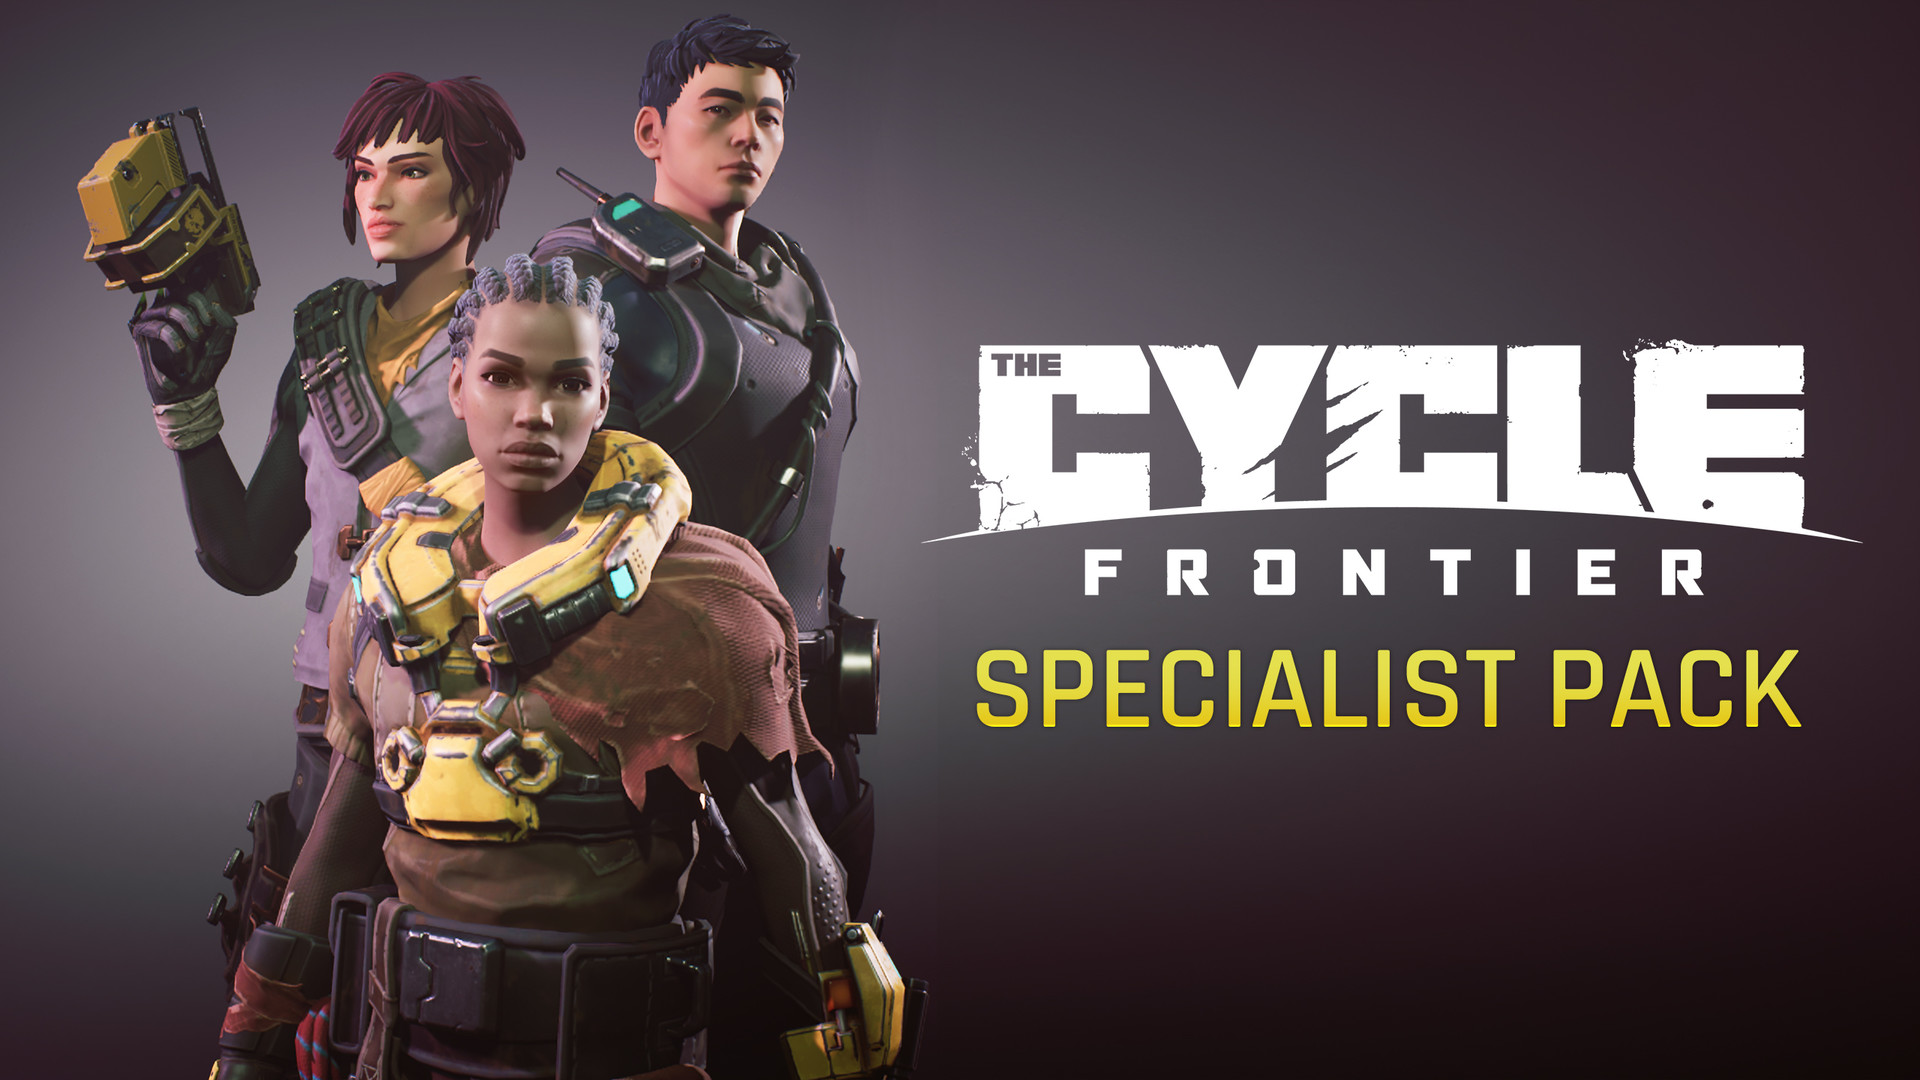 The Cycle: Frontier - Specialist Pack DLC Steam CD Key 5.64 usd